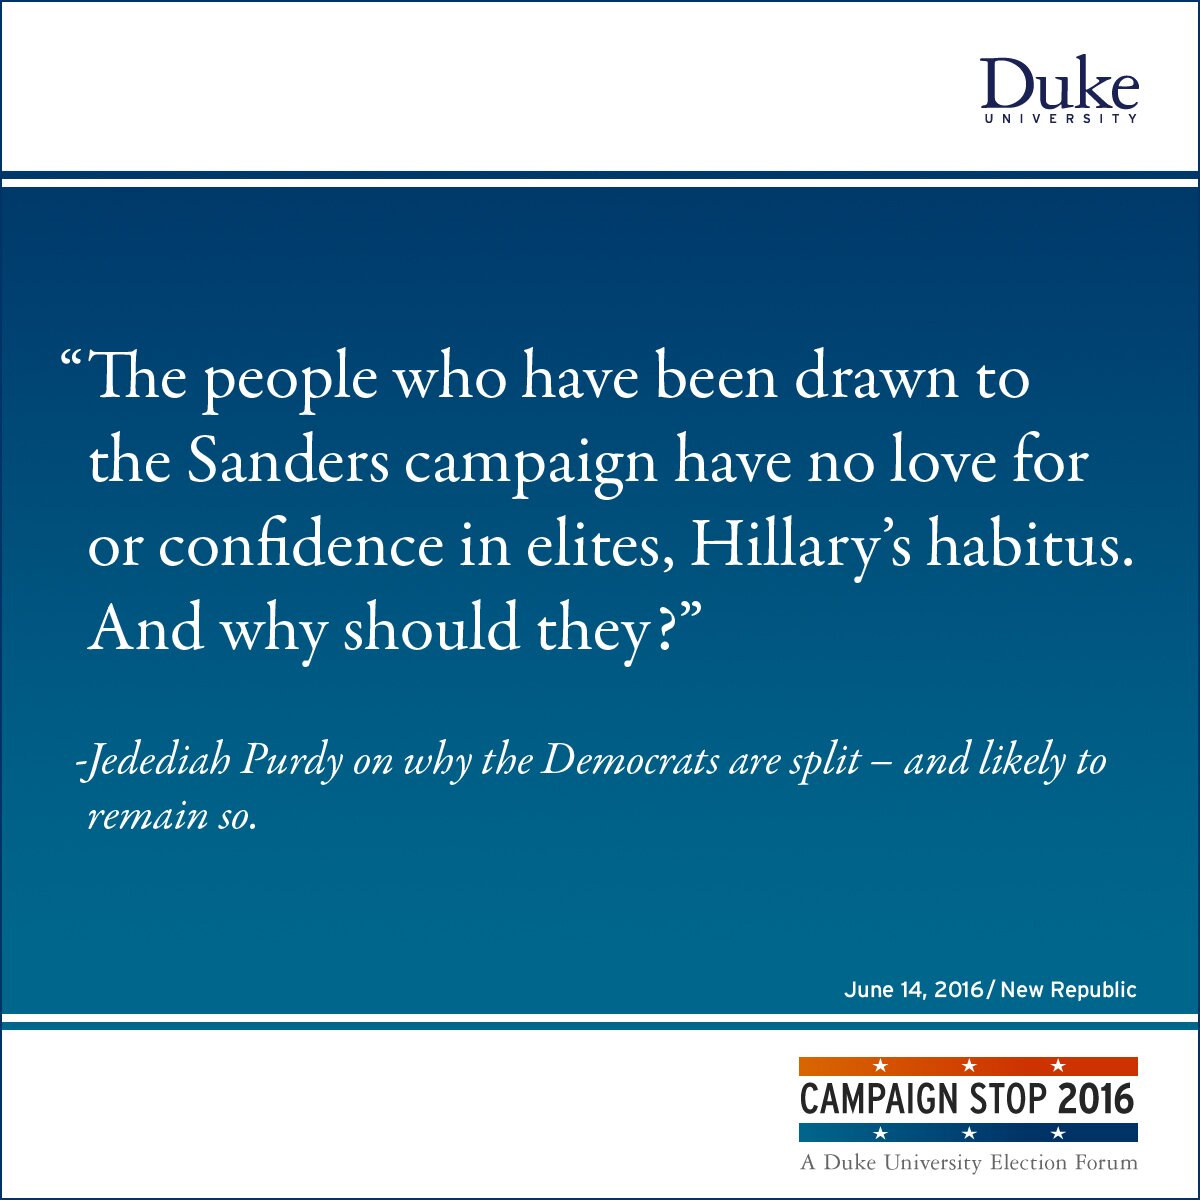 “The people who have been drawn to the Sanders campaign have no love for or confidence in elites, Hillary’s habitus. And why should they?” -Jedediah Purdy on why the Democrats are split – and likely to remain so.